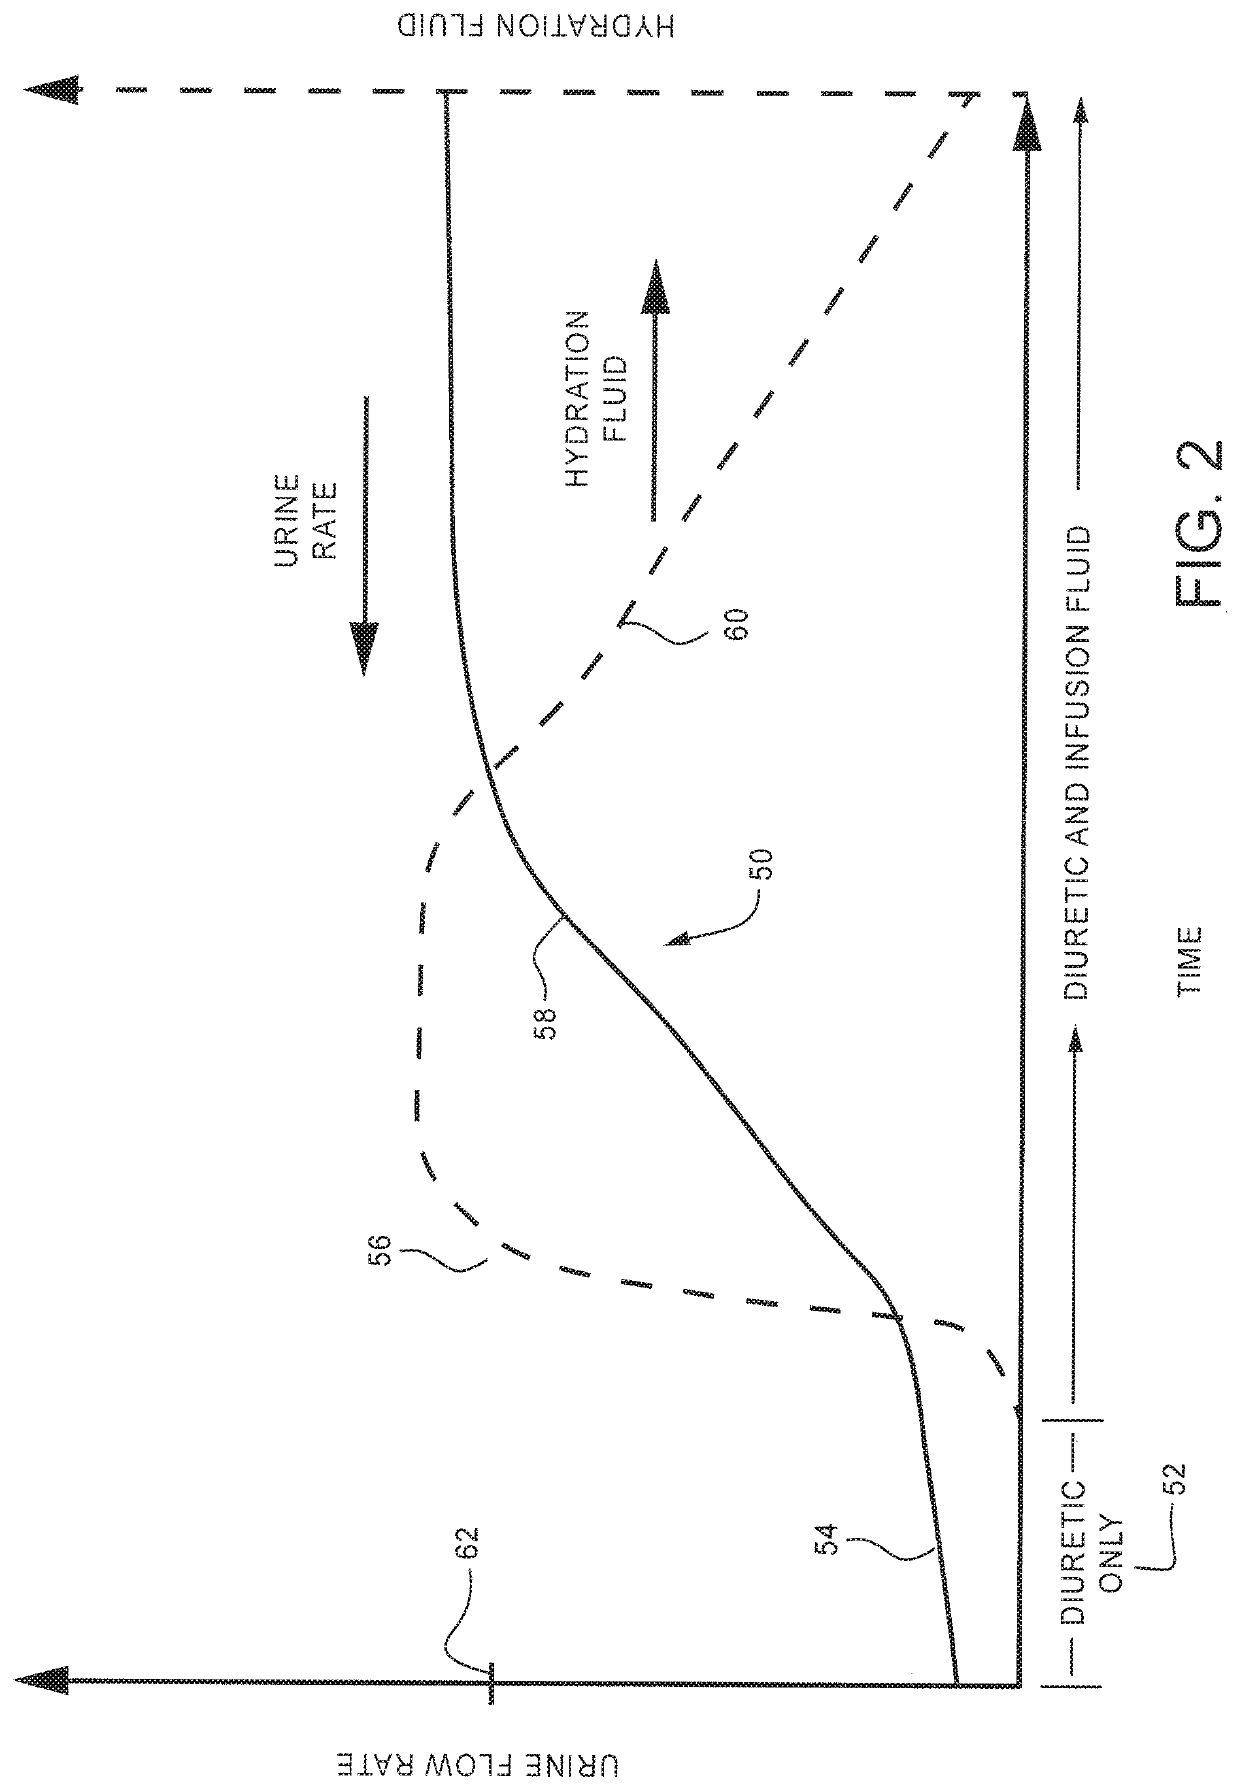 Method and system to treat acute decompensated heart failure